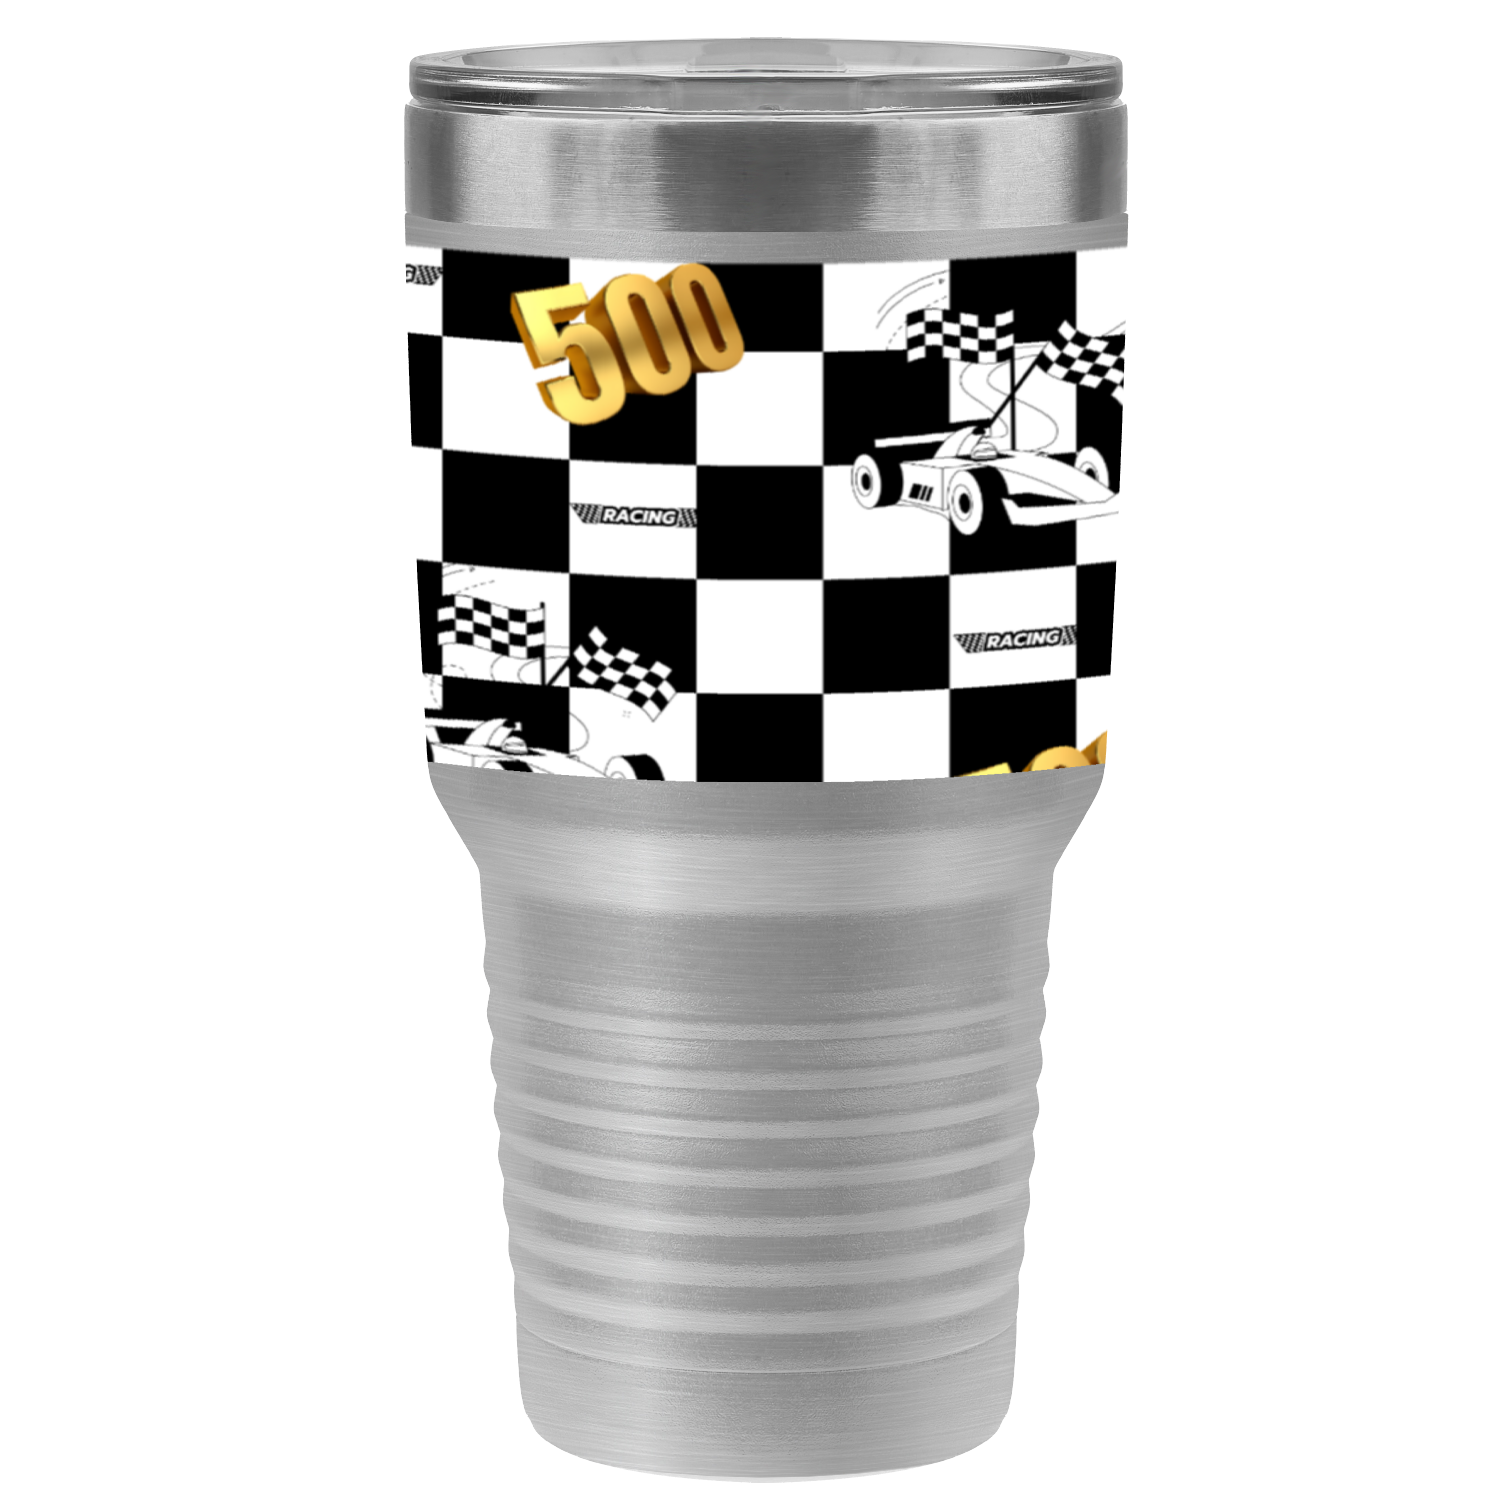 STAINLESS STEEL - Indy 500 Tumbler - 5 colors - Ships from The USA - tumbler at TFC&H Co.